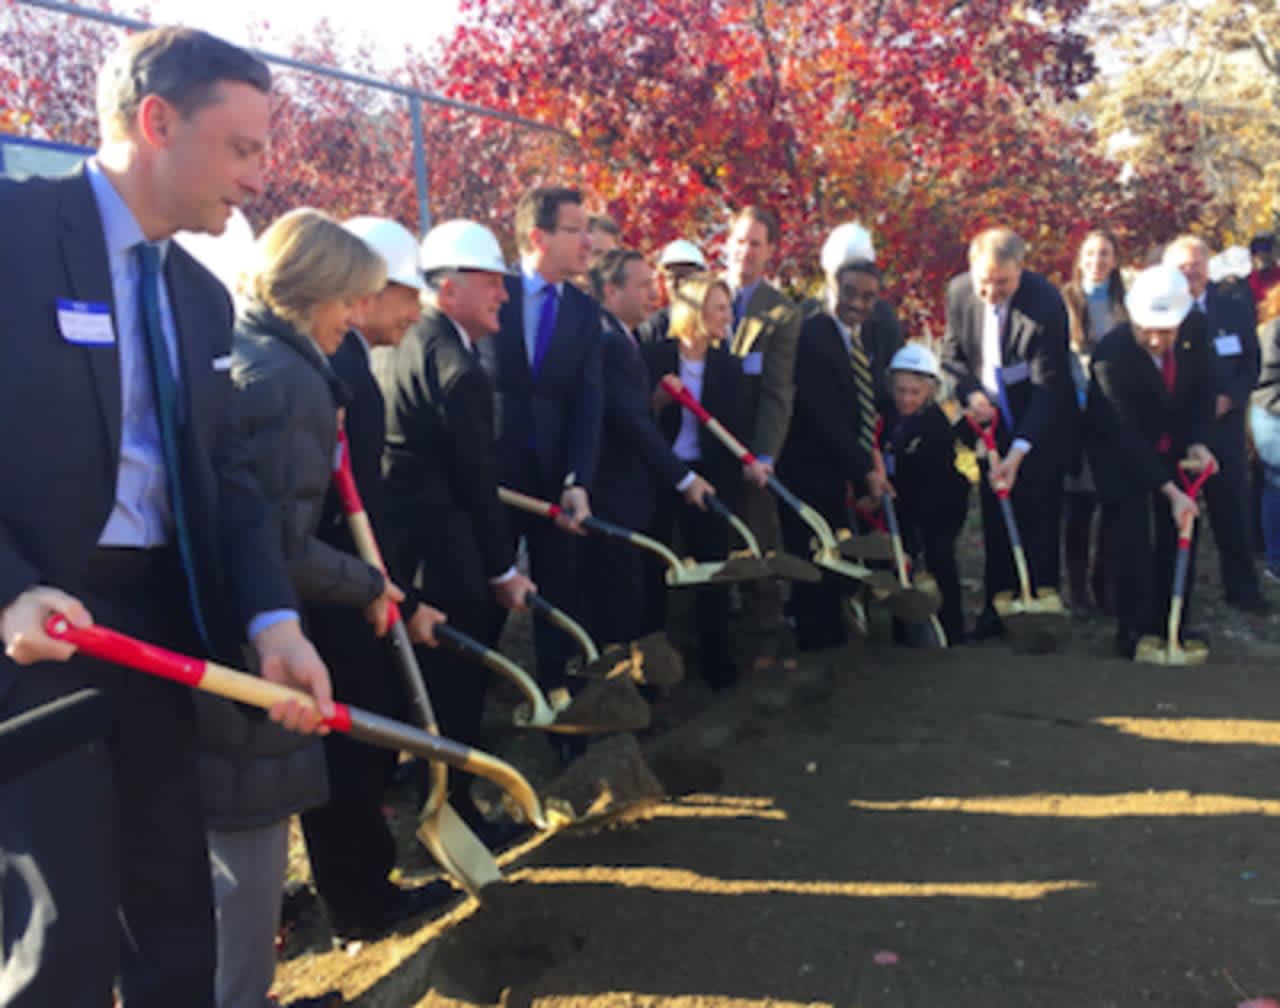 Gov. Dannel P. Malloy, center, at the groundbreaking ceremony or the Washington Village Redevelopment Project on Monday.